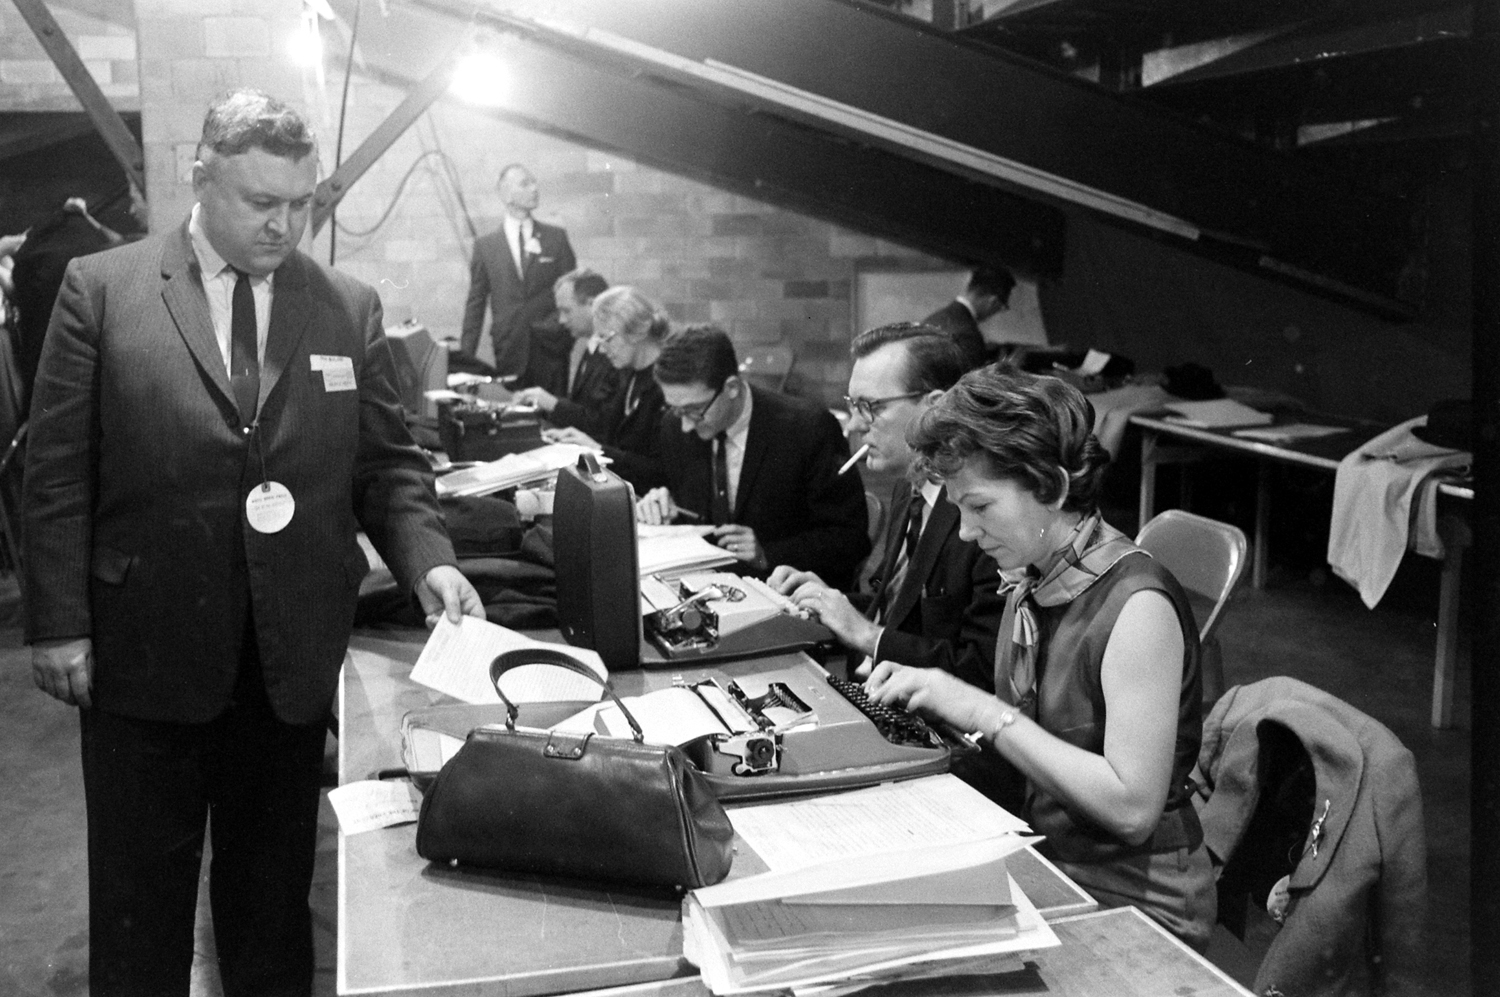 Reporters in the bowels of the University of Kentucky's Memorial Coliseum during the school's Founders Day Convocation, at which President Johnson spoke, Feb. 1965.